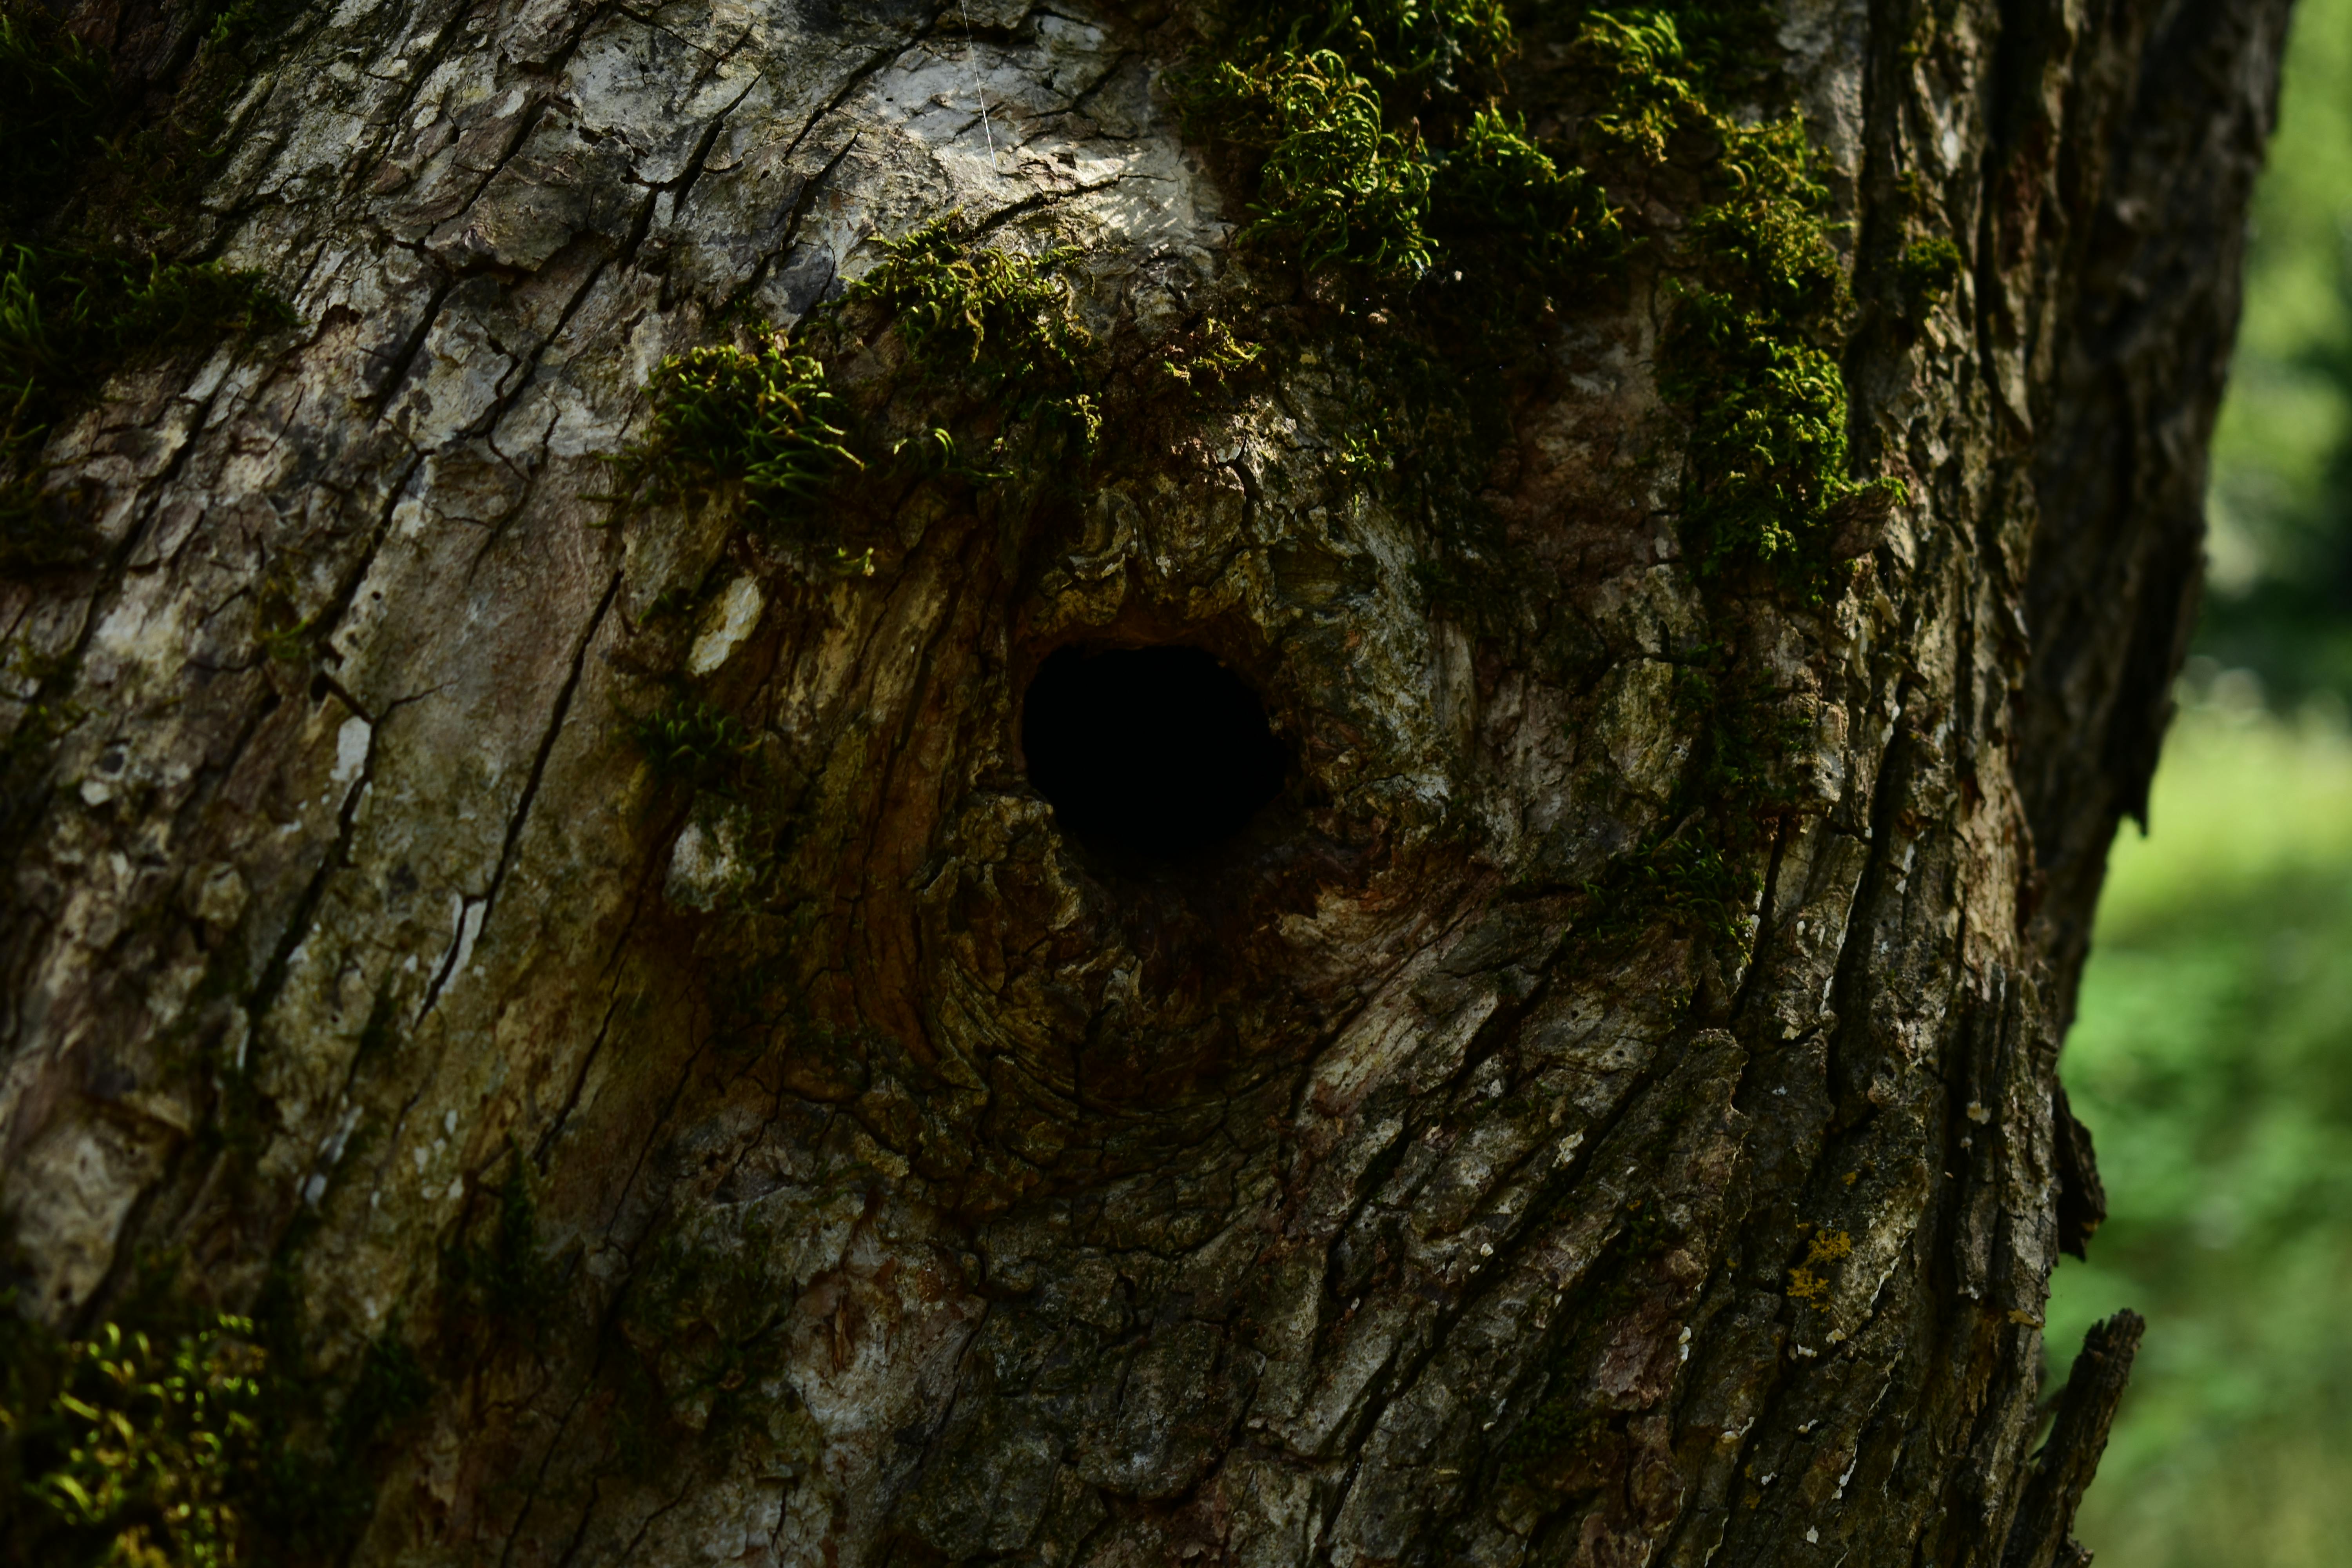 Free stock photo of black hole in tree trunk